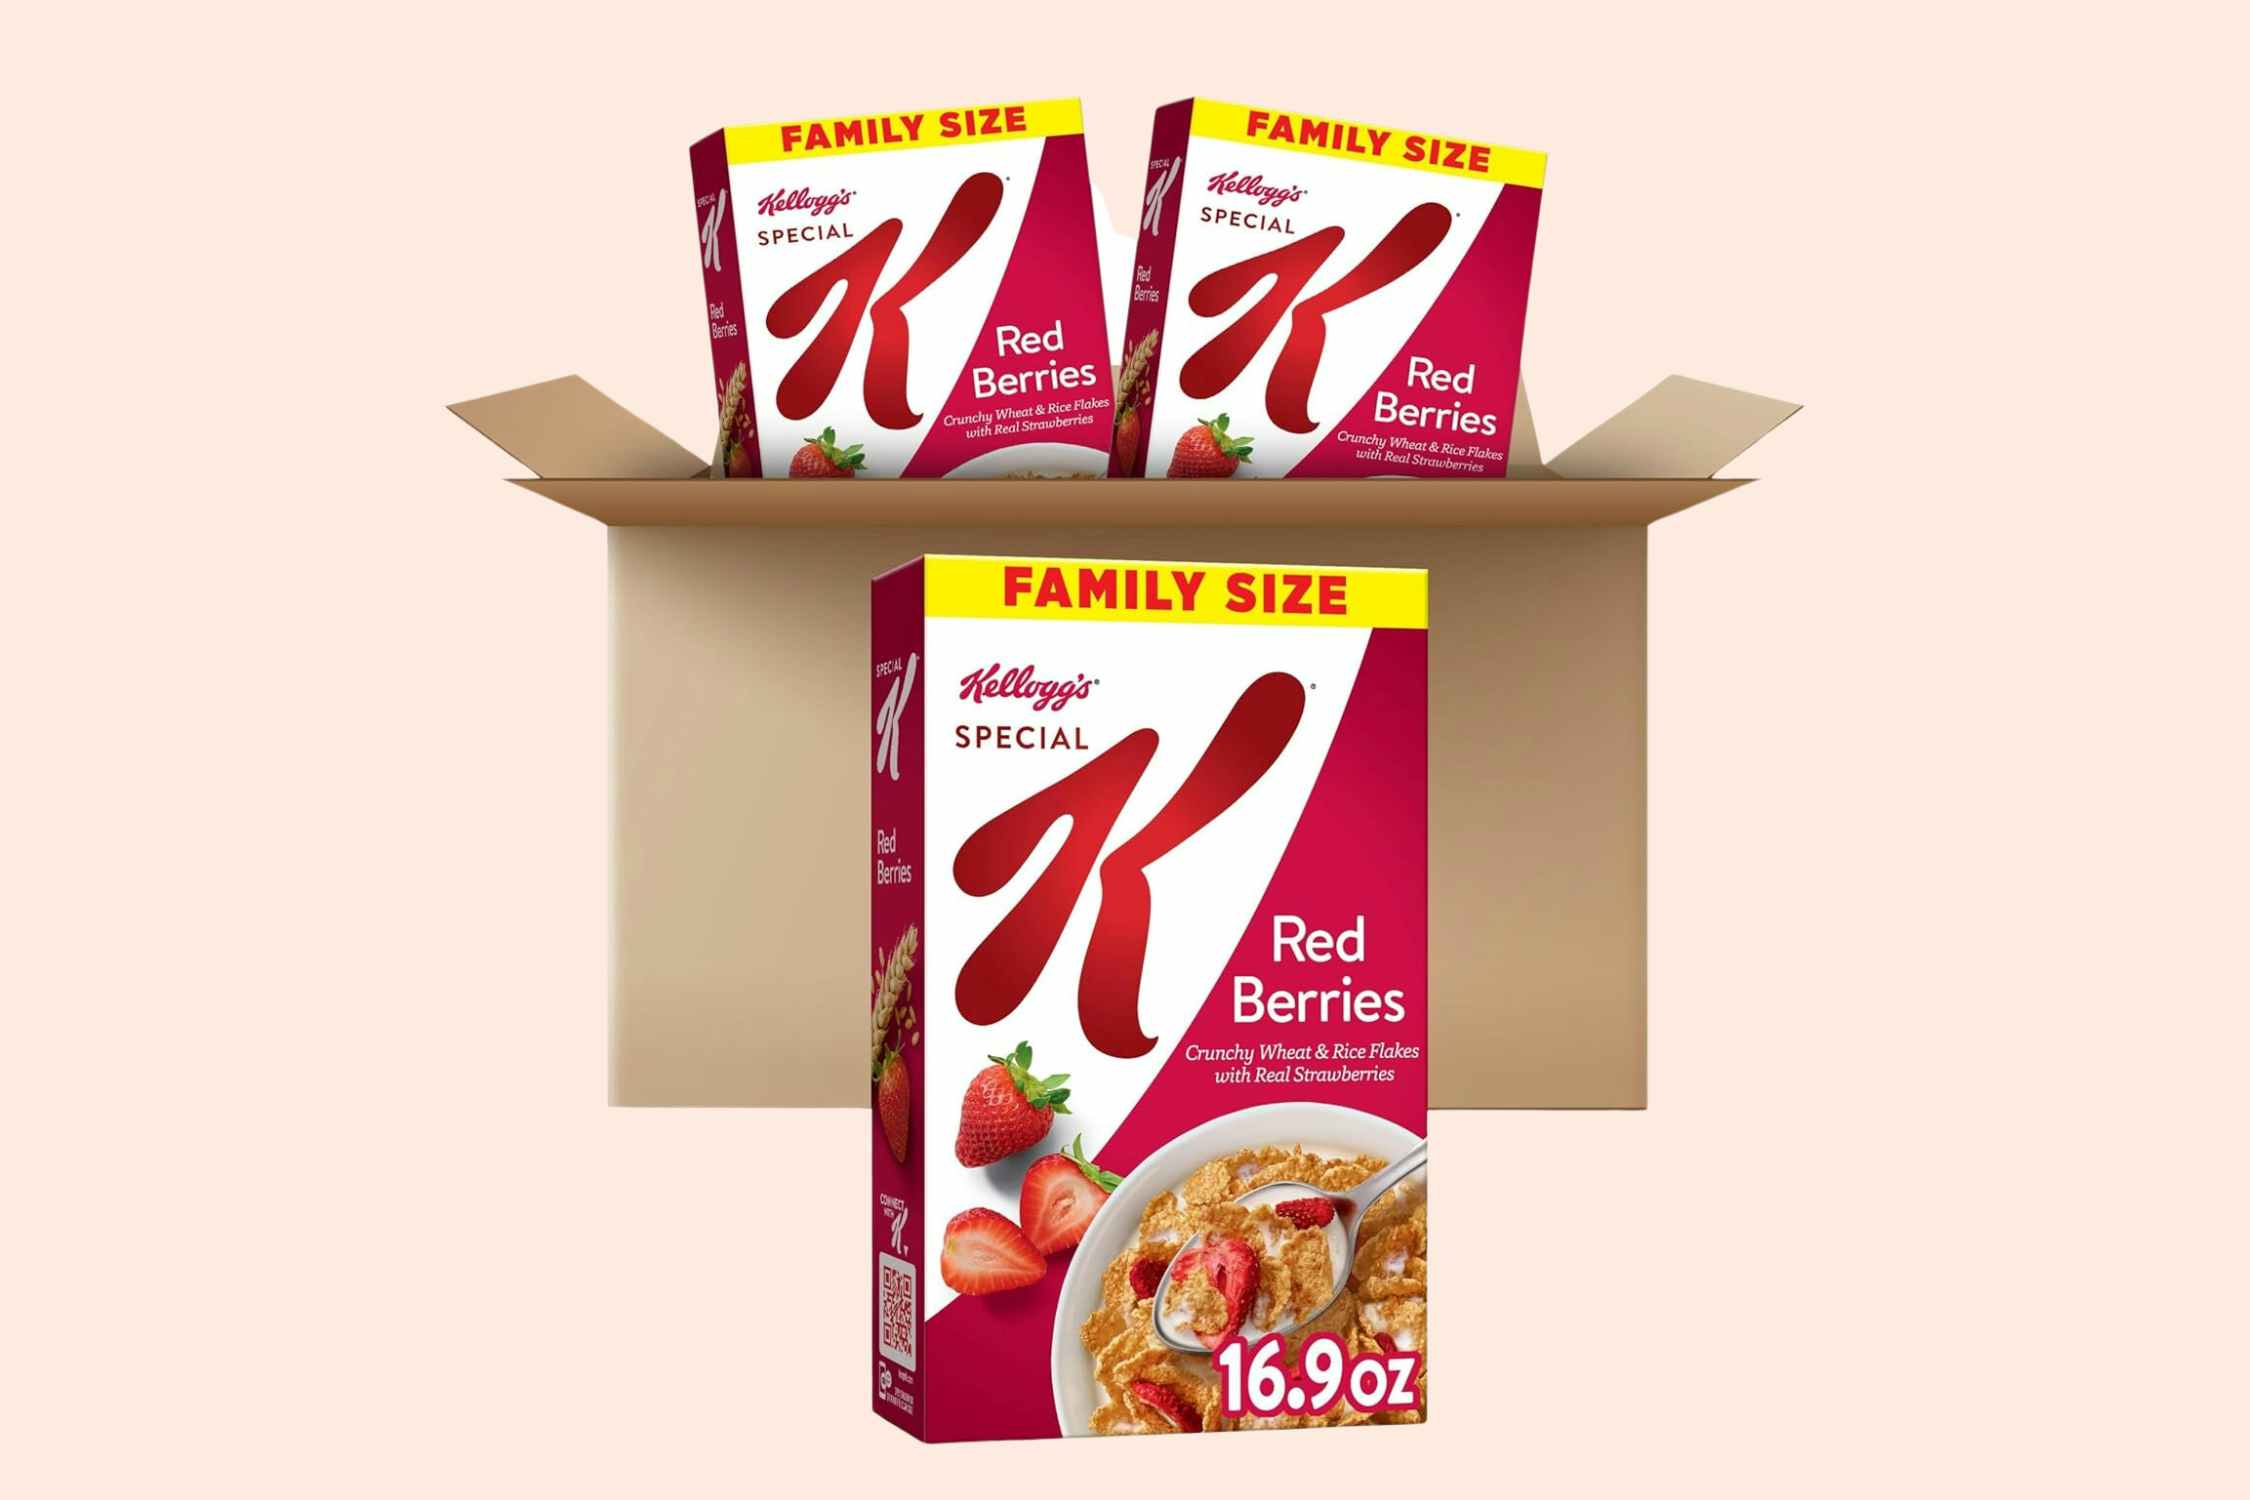 Special K Red Berries Cereal, 3 Boxes for $5.38 on Amazon